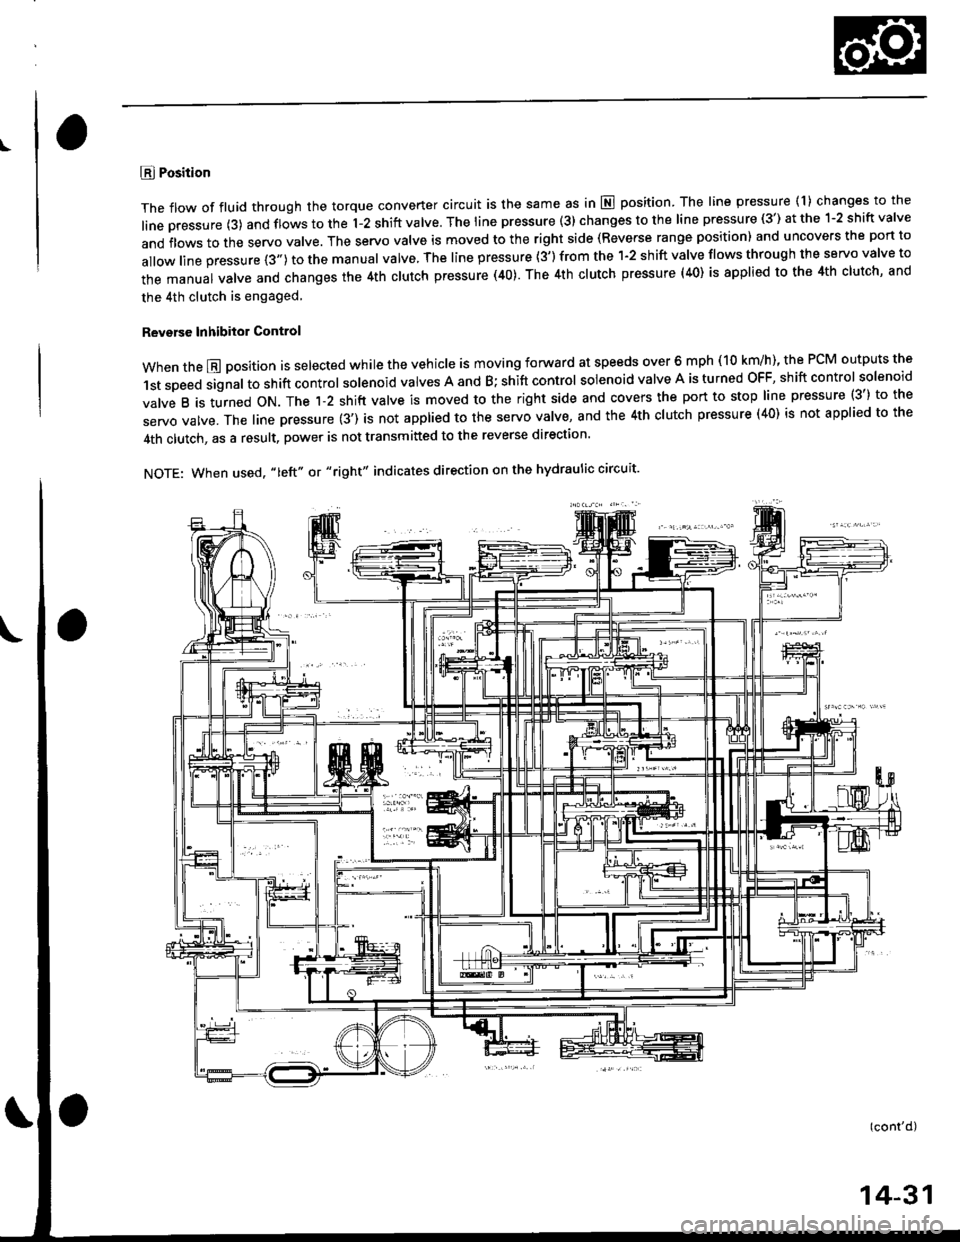 HONDA CIVIC 1996 6.G Workshop Manual L
E Position
The flow of fluid through the torque convefter circuit is the same as in E position The line pressure (1) changes to the
line pressure (3) and flows to the l-2 shift valve. The iine press